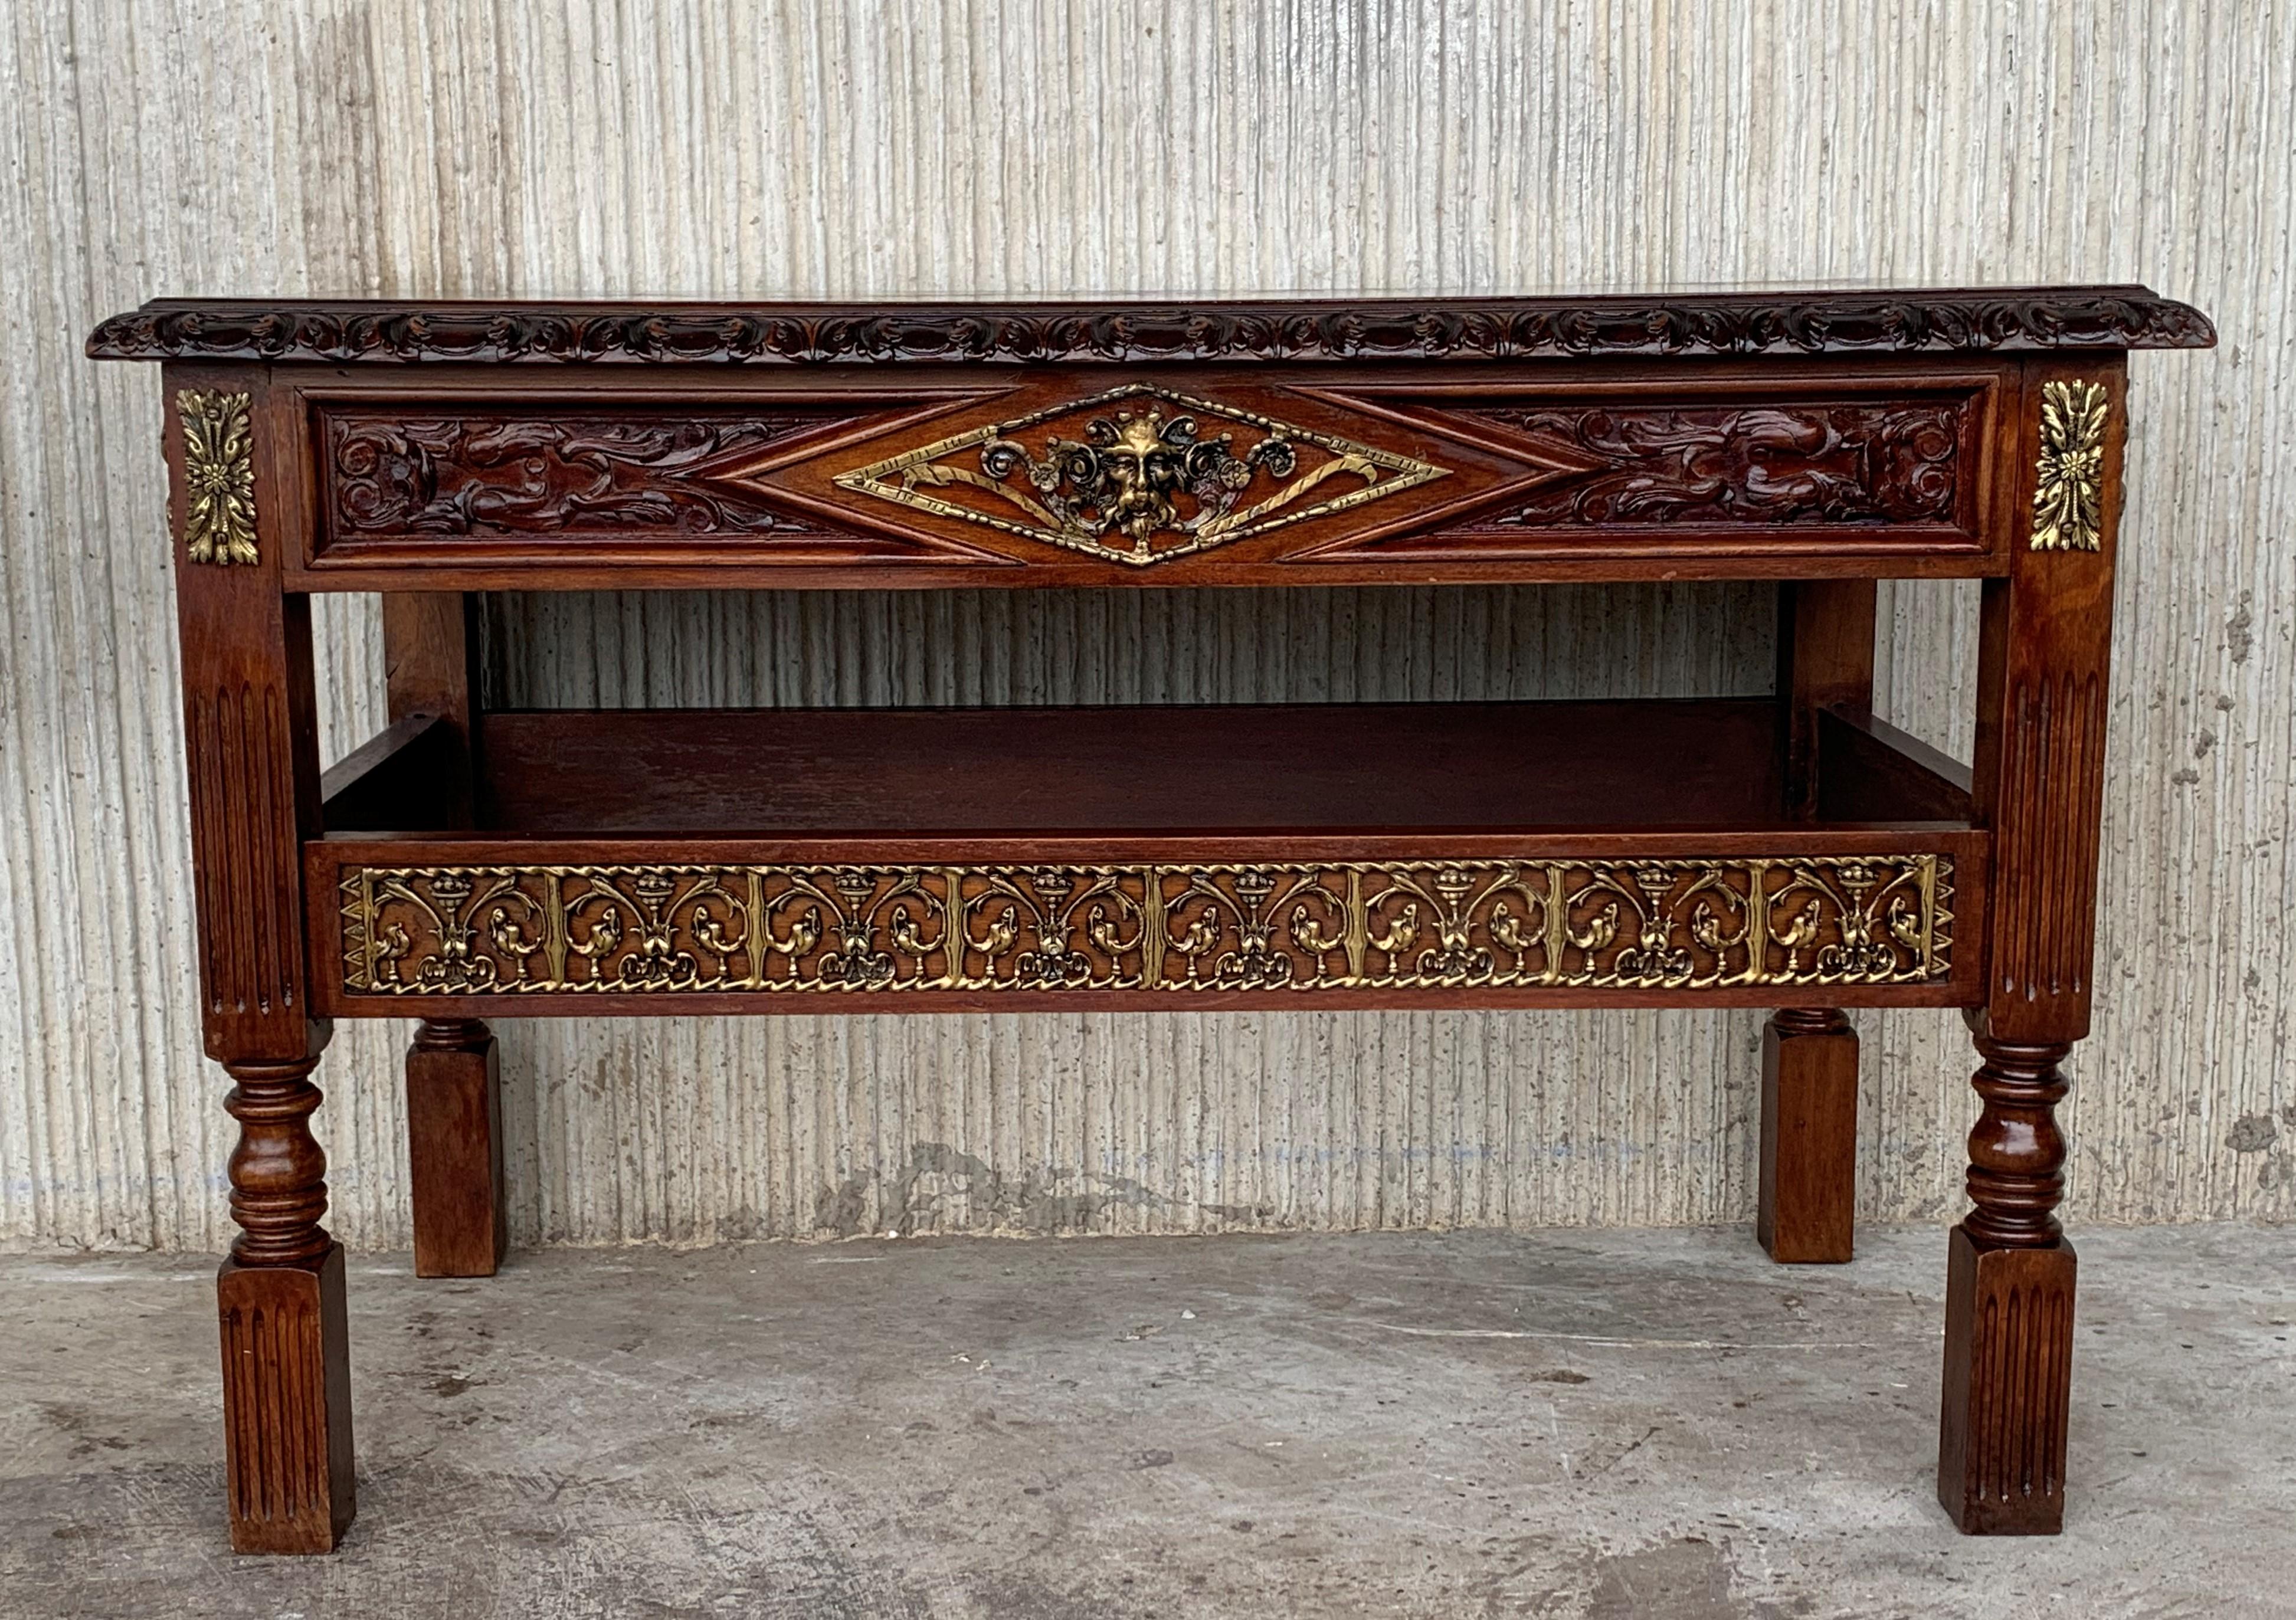 19th century Spanish Renaissance walnut writing table is a splendid example of the breed, with classical architecture enhanced by hand carved relief work in an abstract expression of the Renaissance style. Four carved fluted columns the main legs.